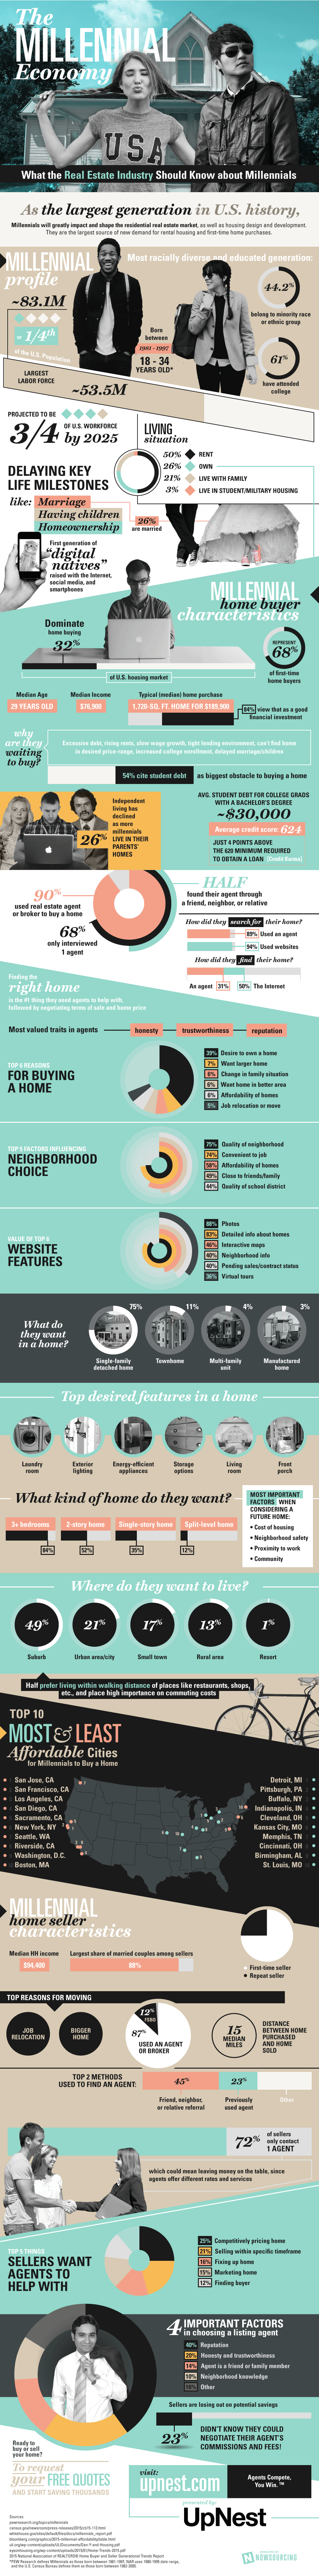 [Infographic] What do Millennials look for in real estate agents, housing?